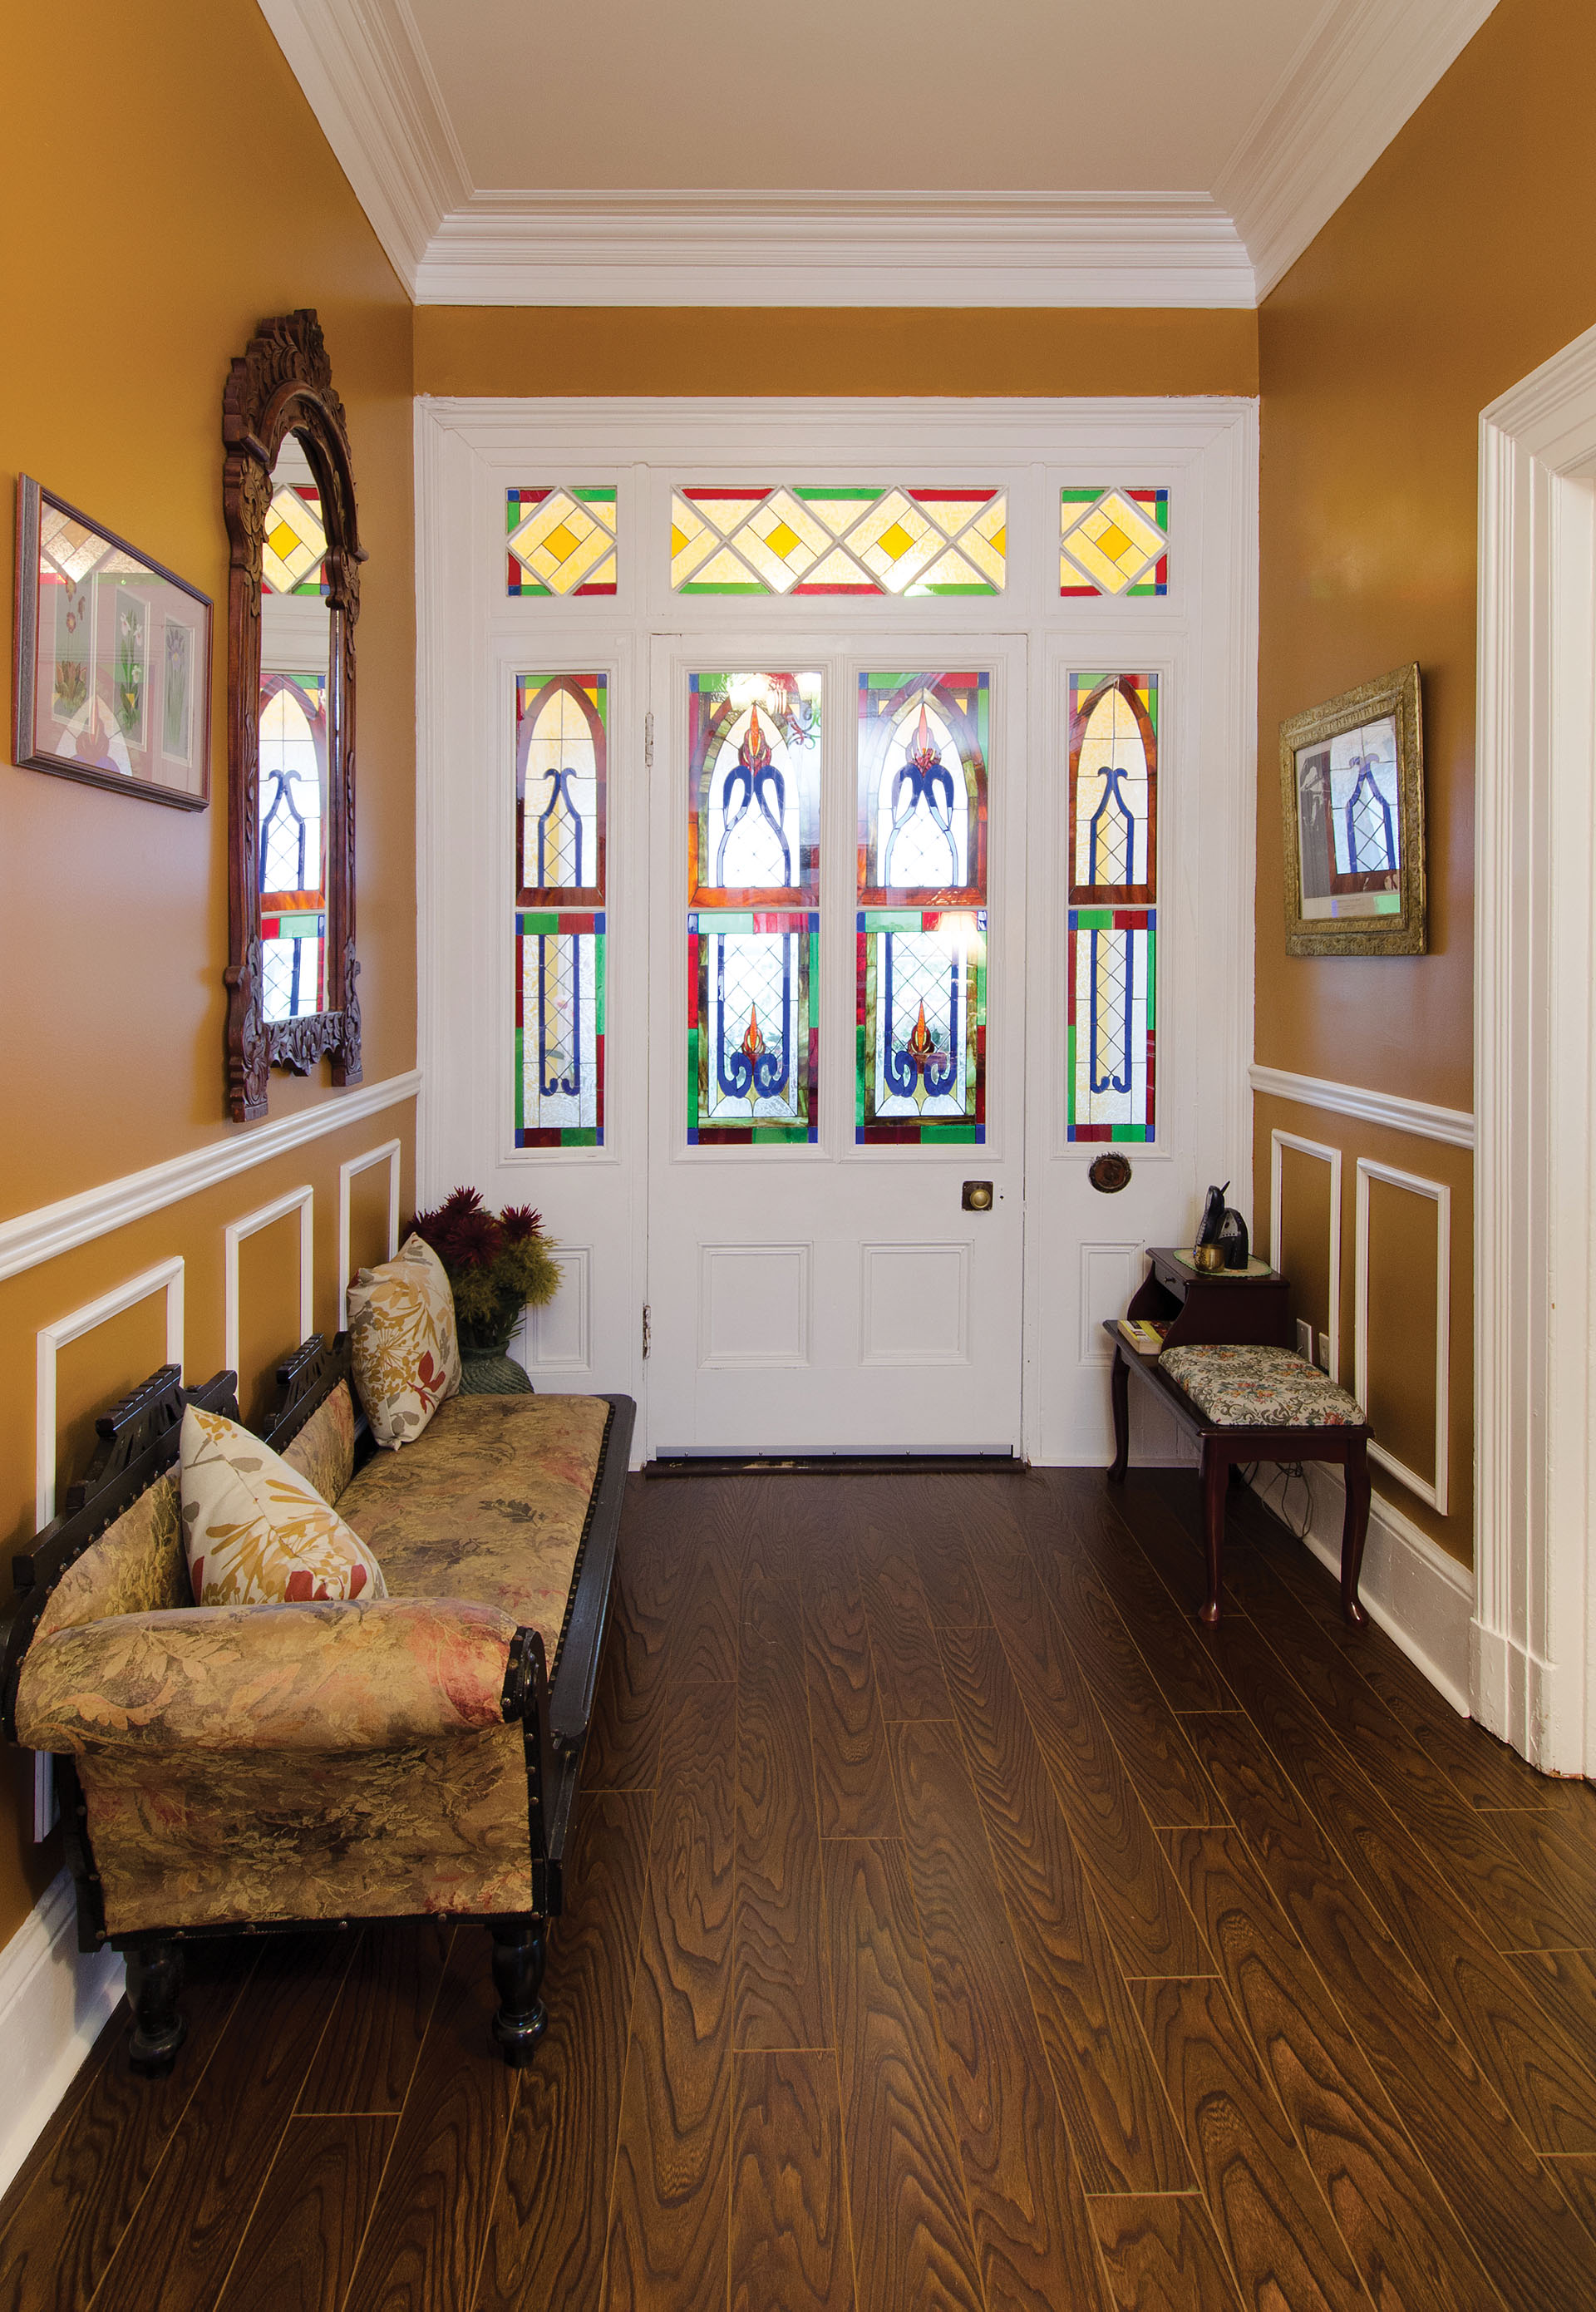 Home Tour: Restored Victorian Charm In Heart’s Content